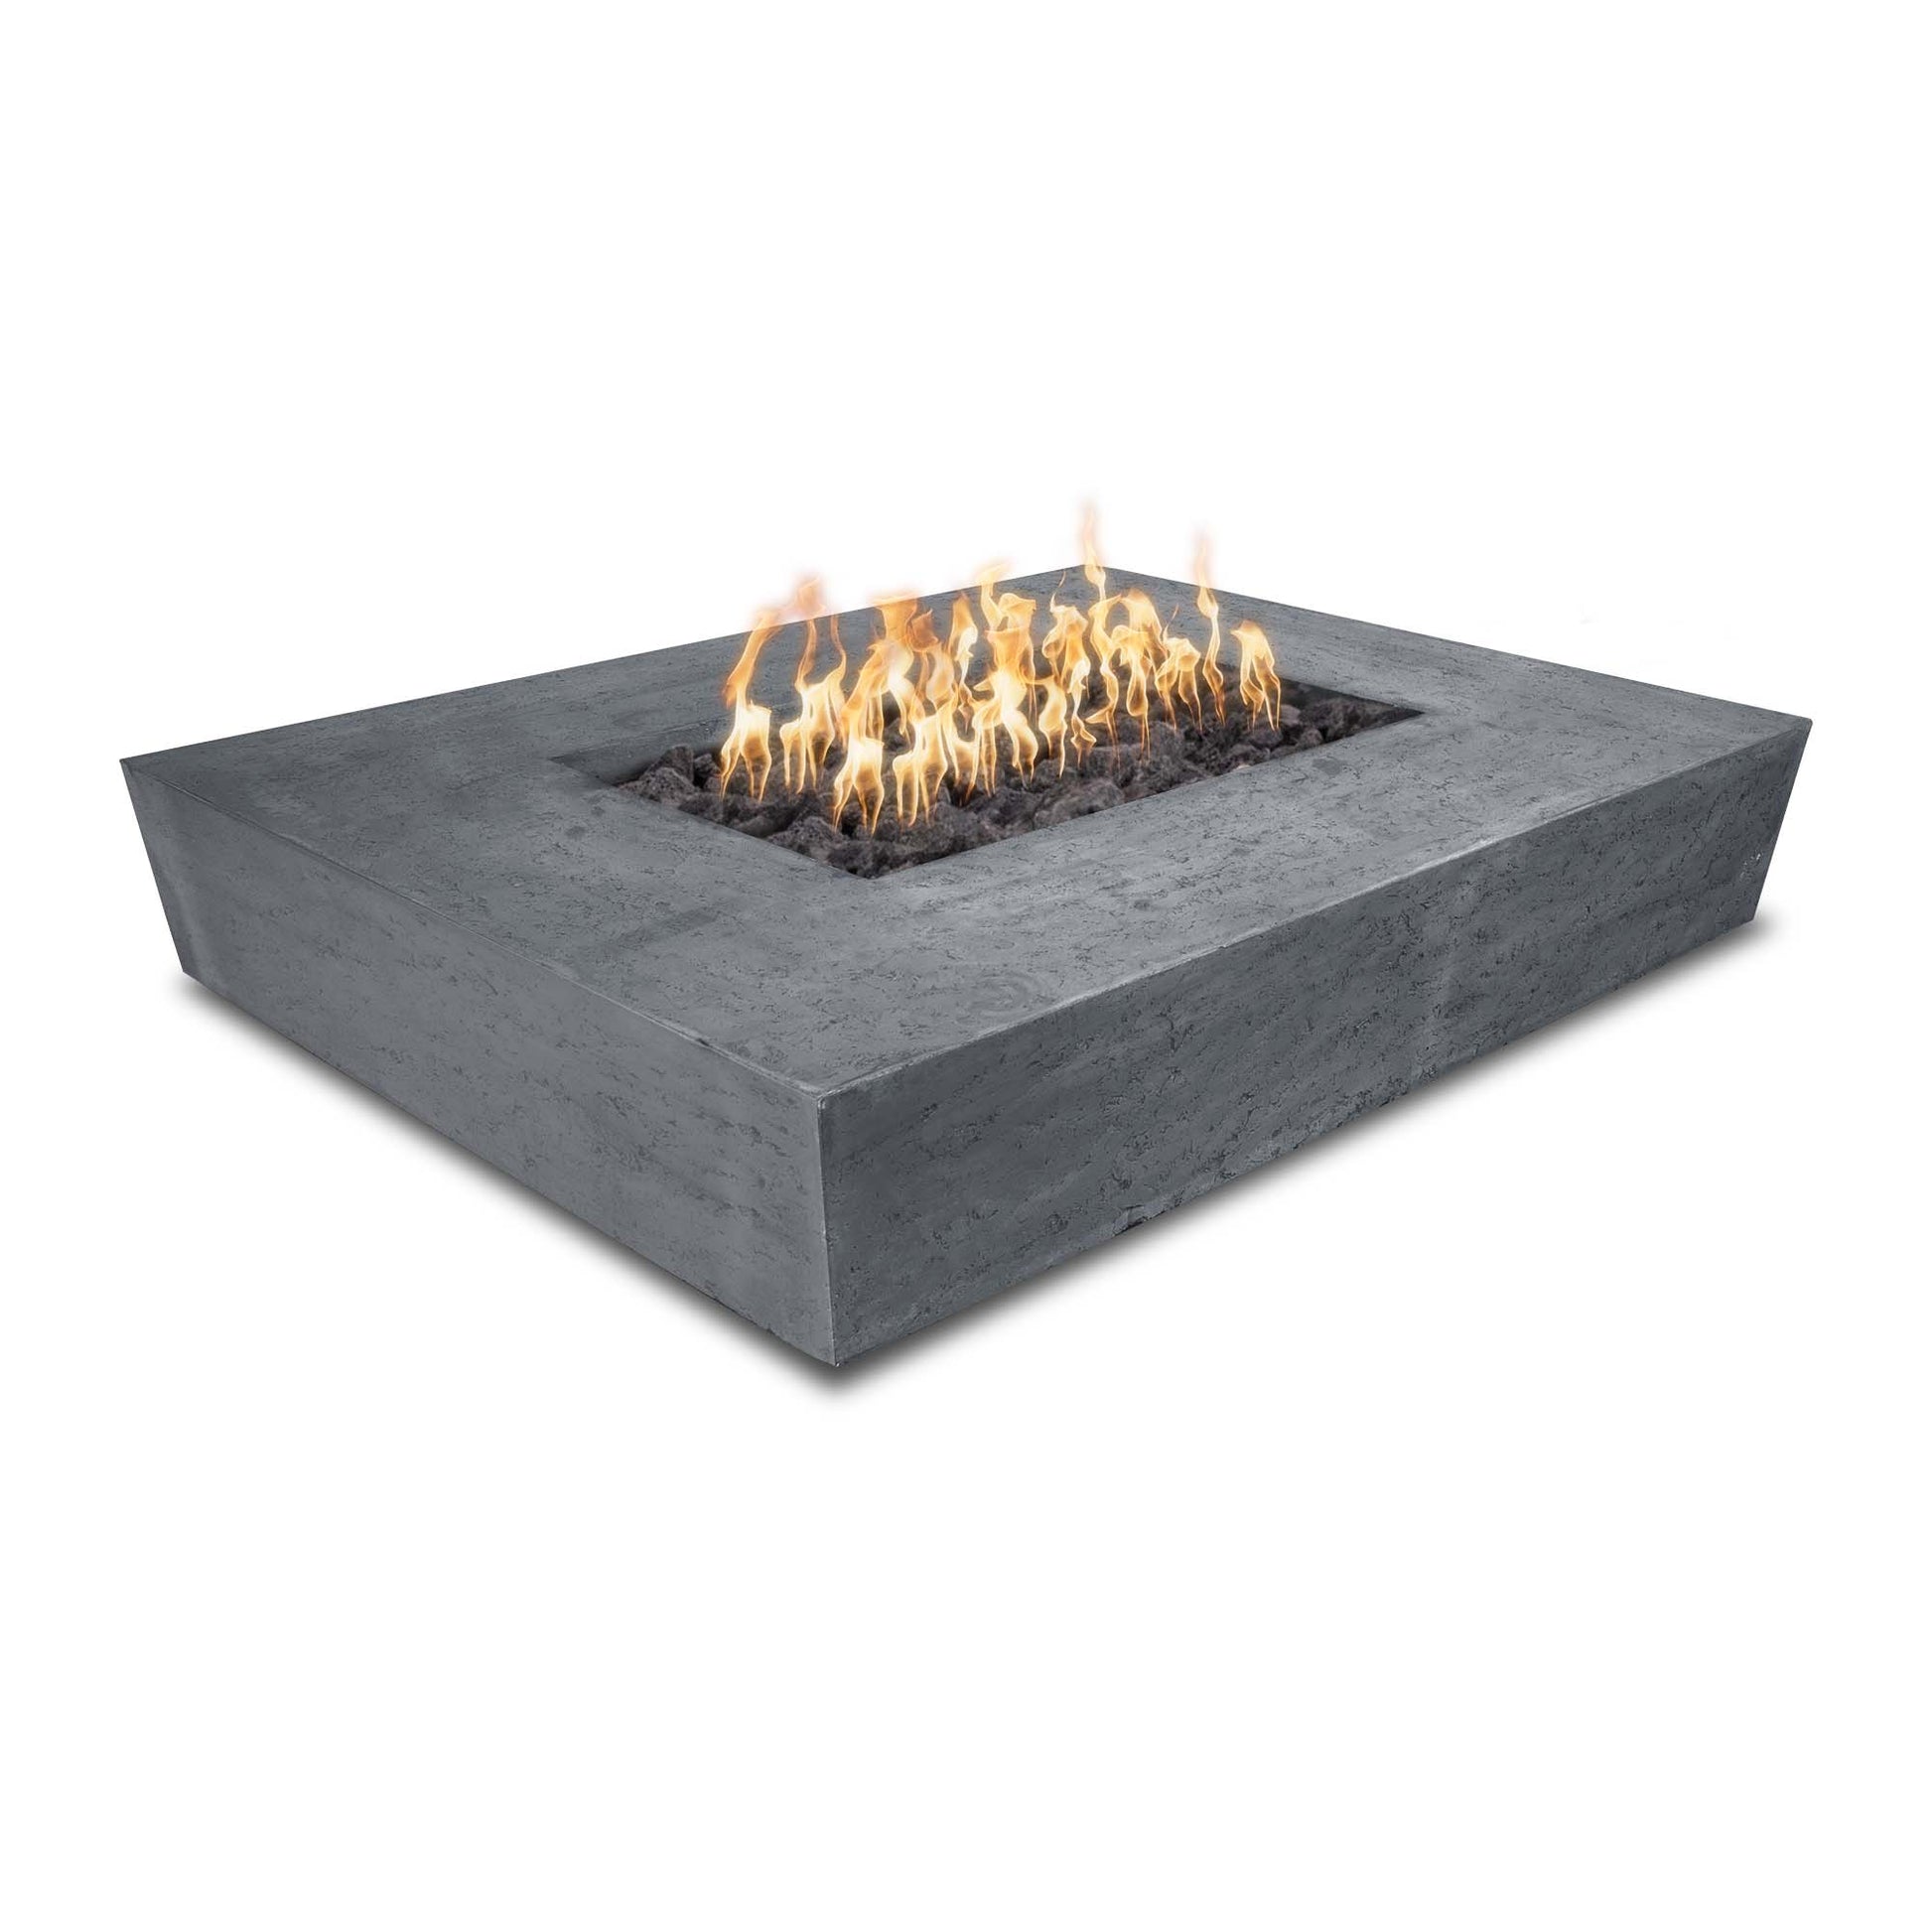 The Outdoor Plus Rectangular Heiko 58" Metallic Pearl GFRC Concrete Liquid Propane Fire Pit with 110V Electronic Ignition